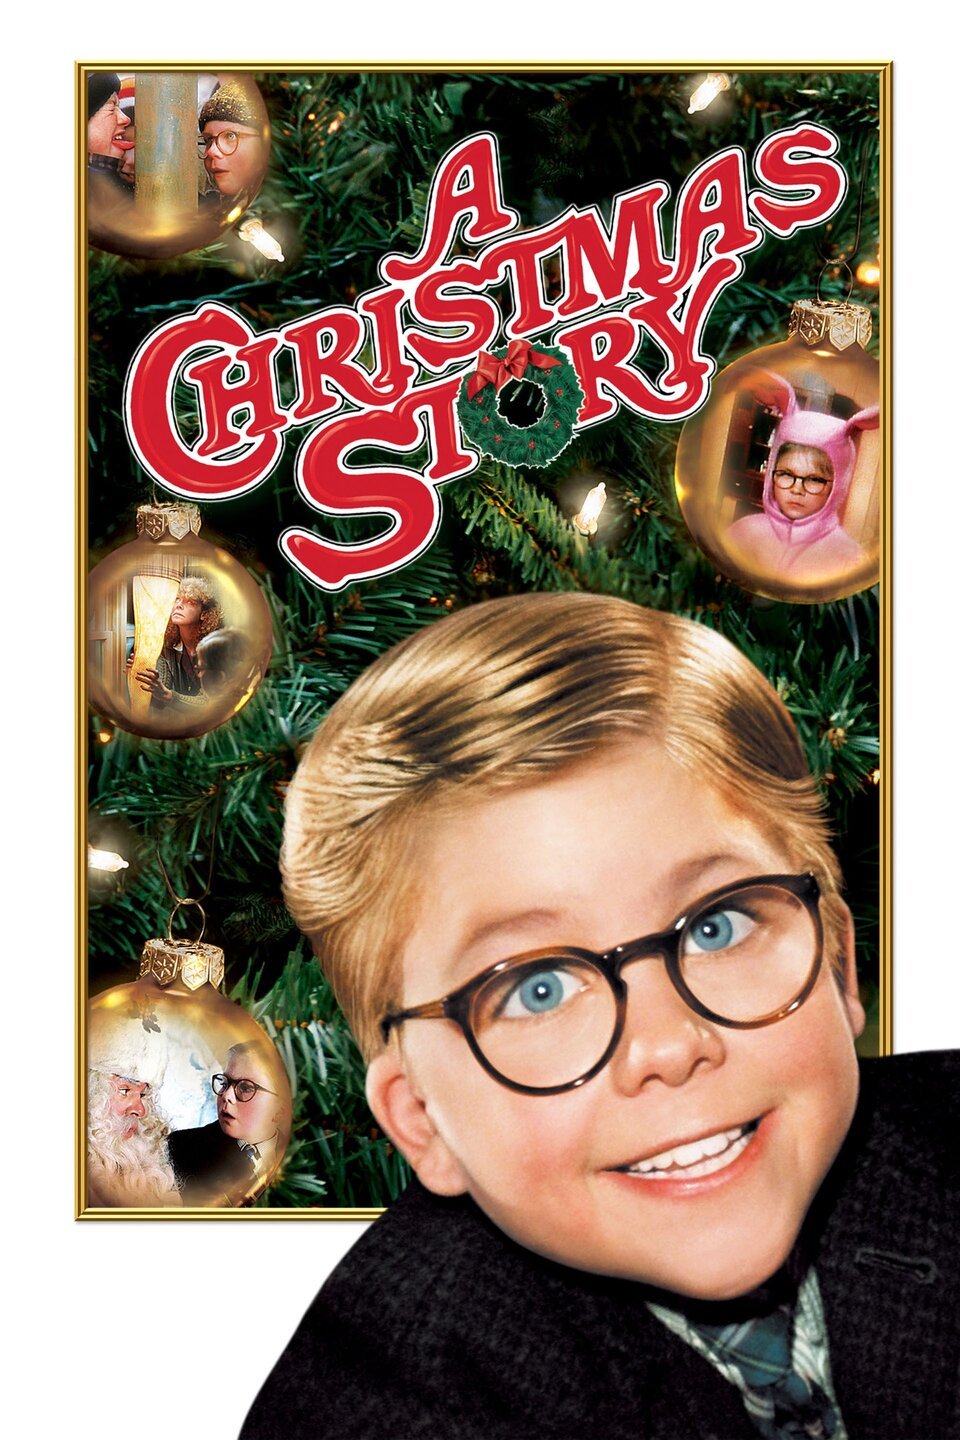 A Christmas Story Trailer 1 Trailers & Videos Rotten Tomatoes